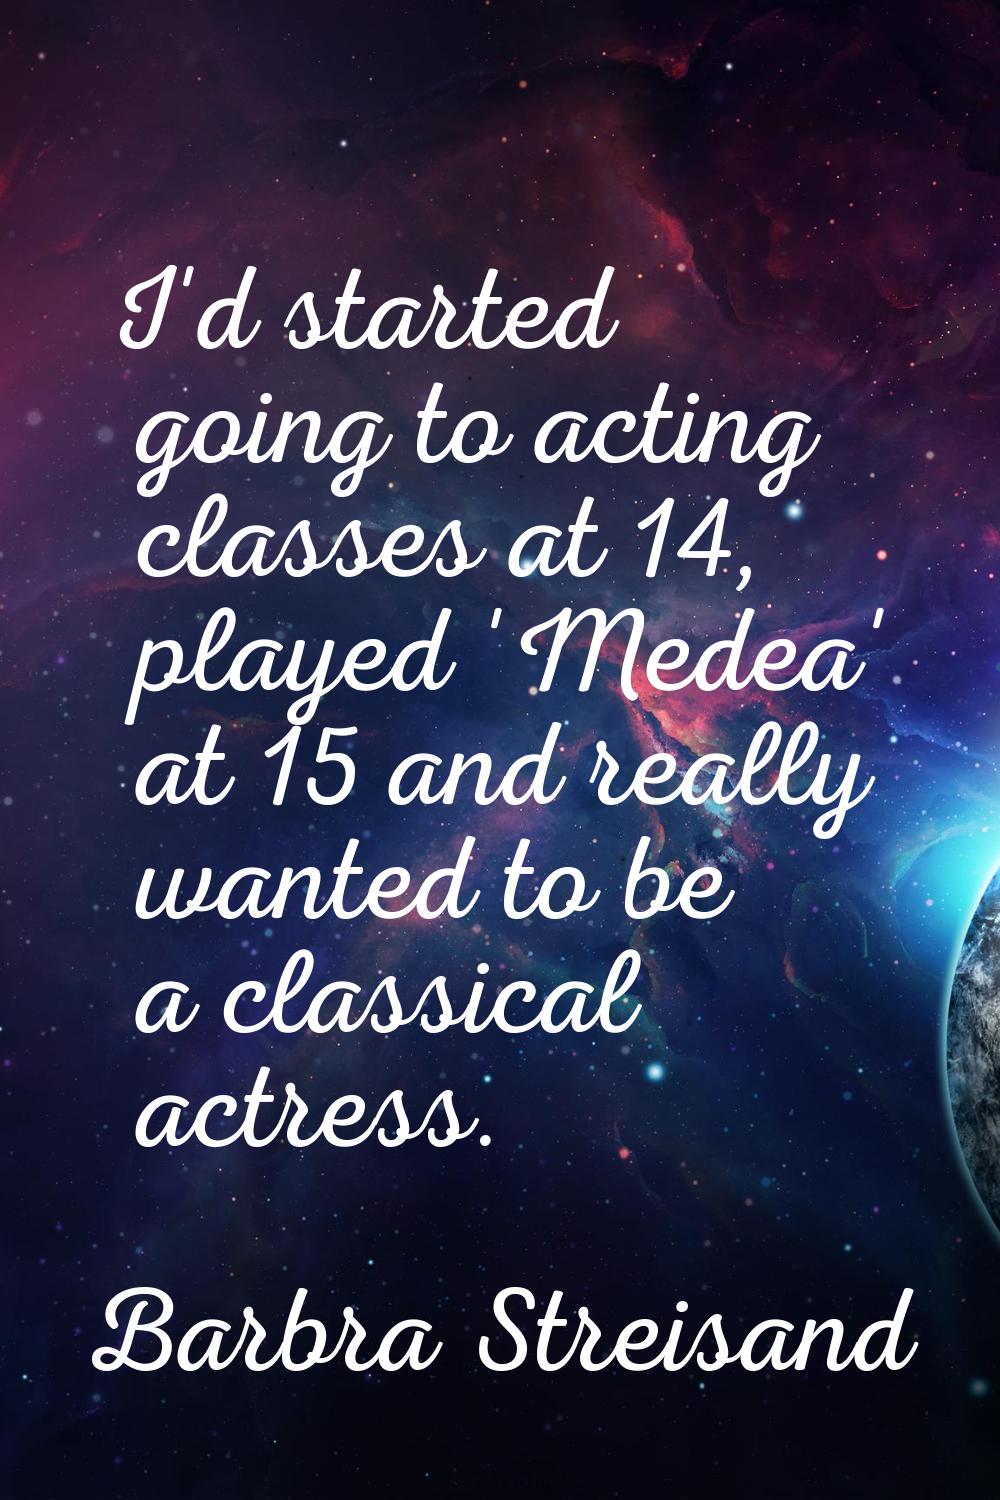 I'd started going to acting classes at 14, played 'Medea' at 15 and really wanted to be a classical